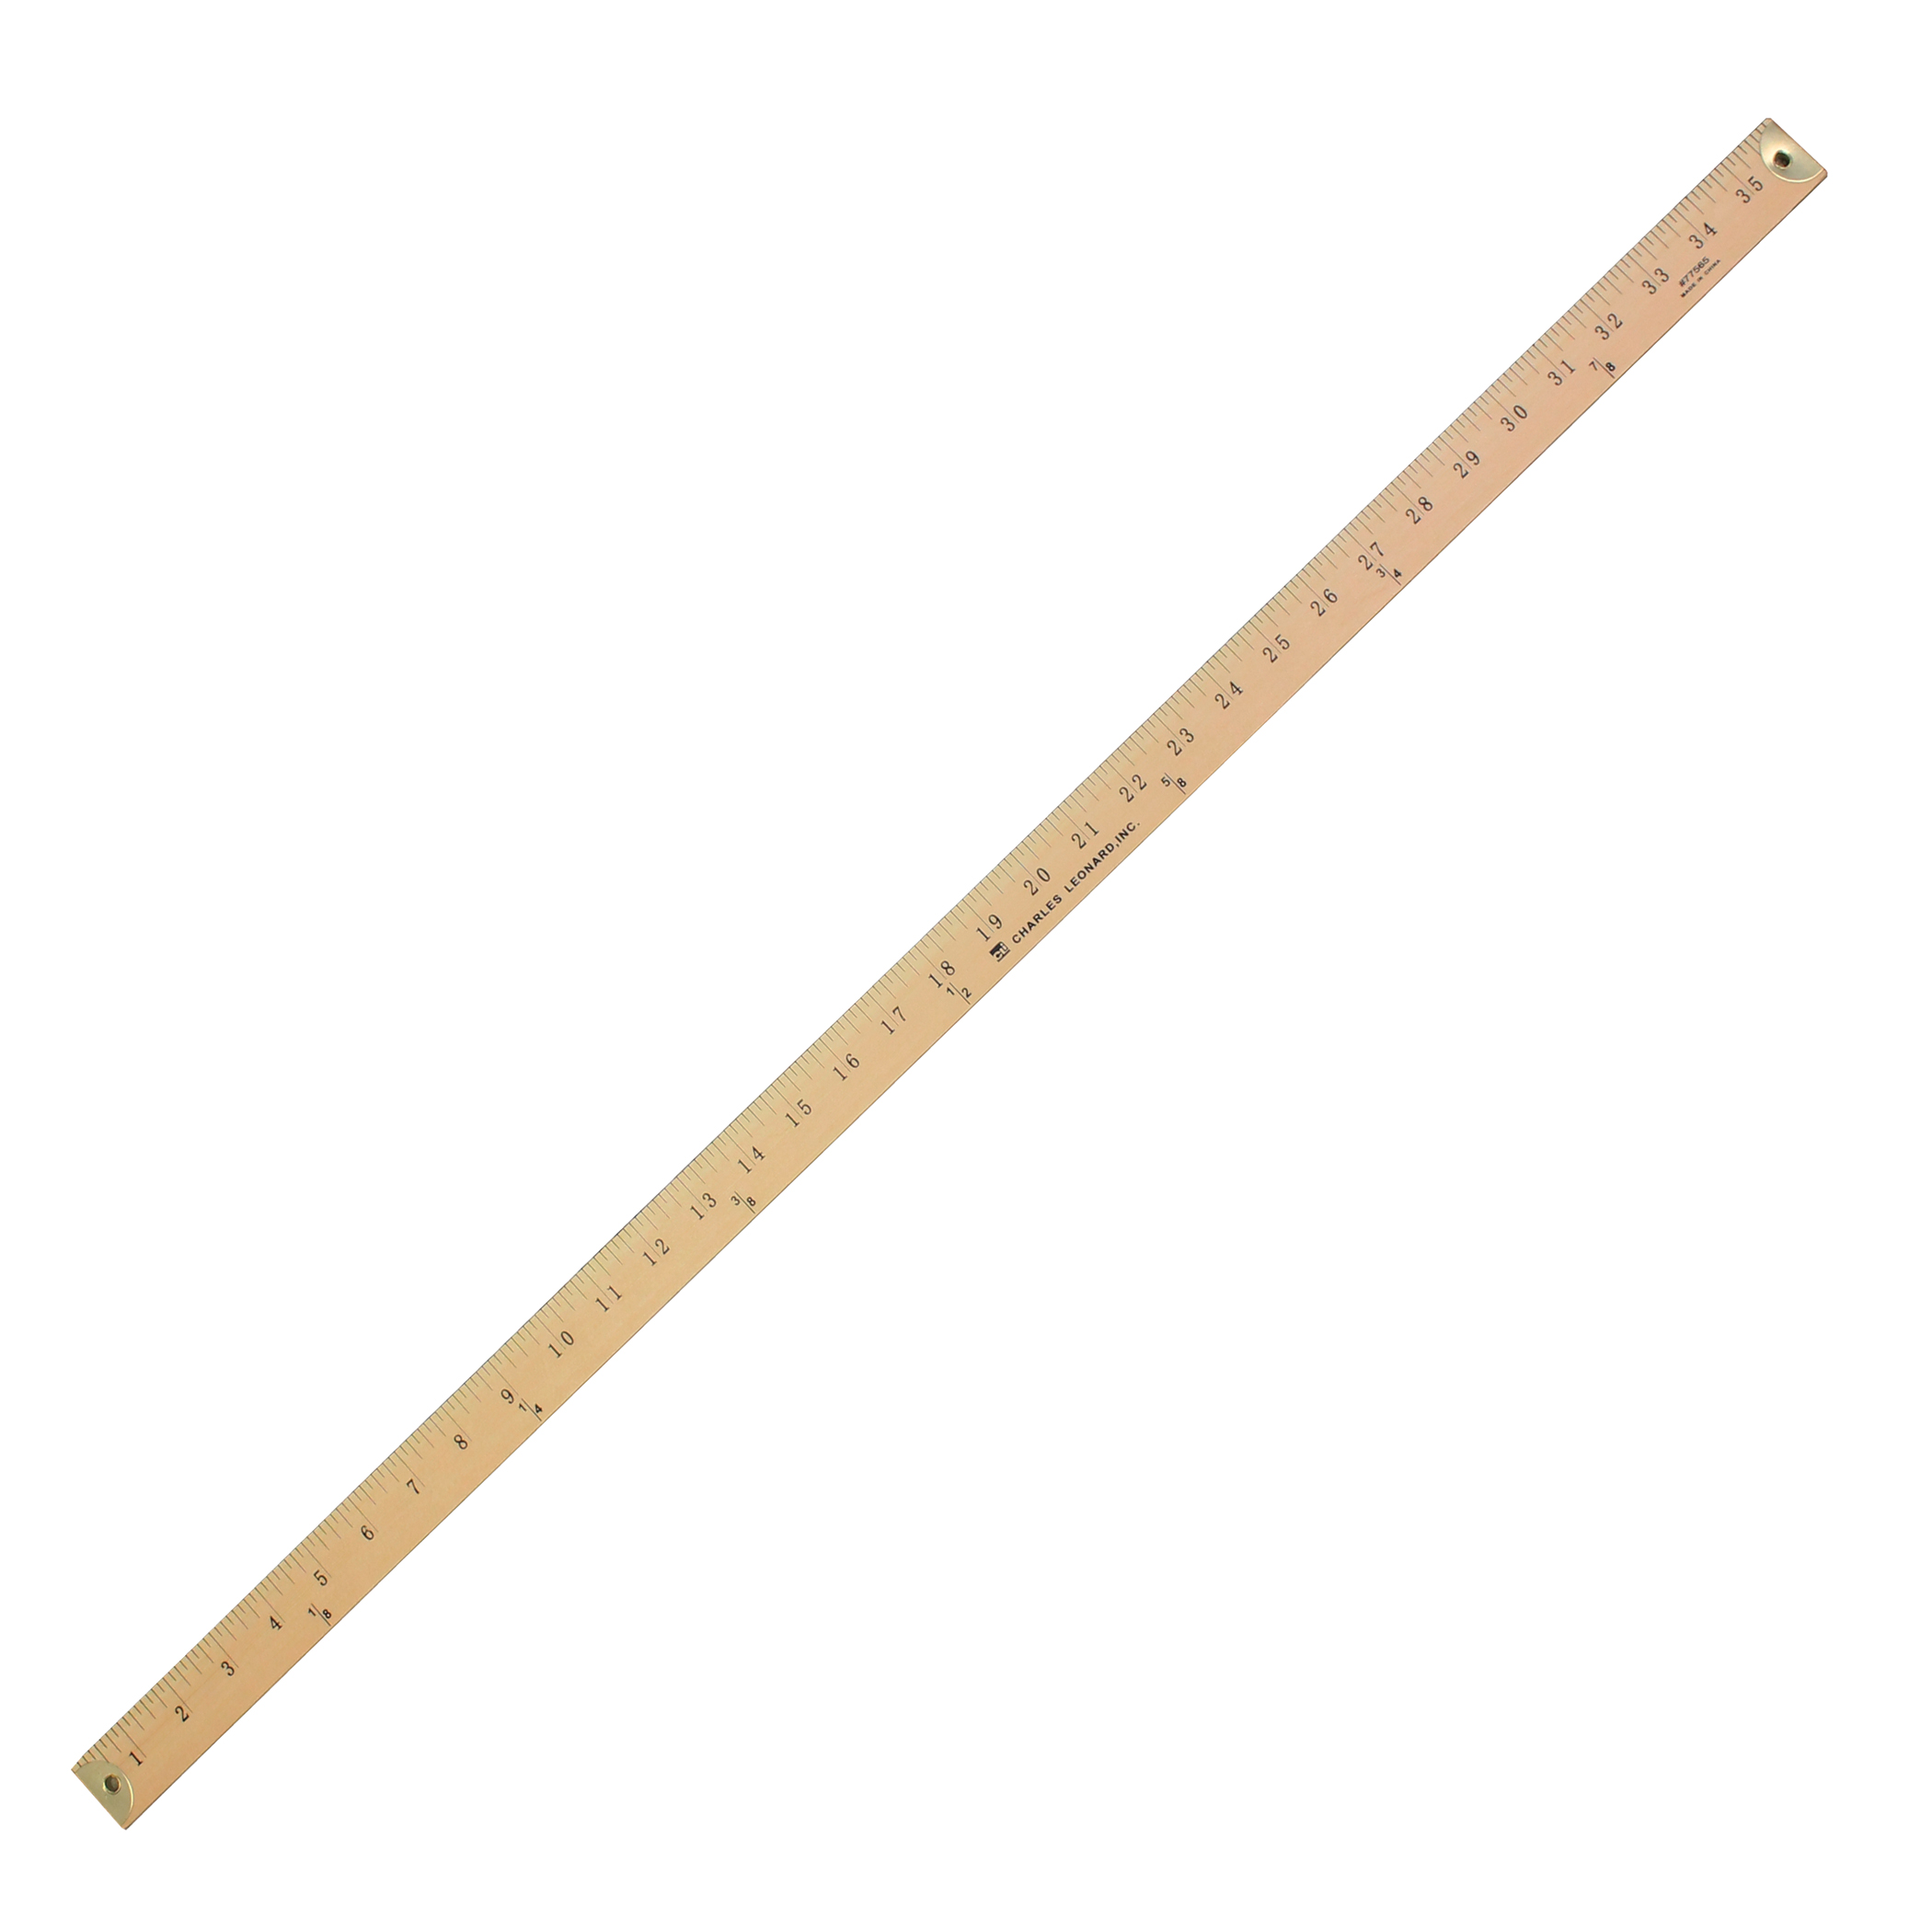 Metal Edged Yardstick Ruler, Inches and 1/8 Yard Measurements, Natural Wood, 36 Inches